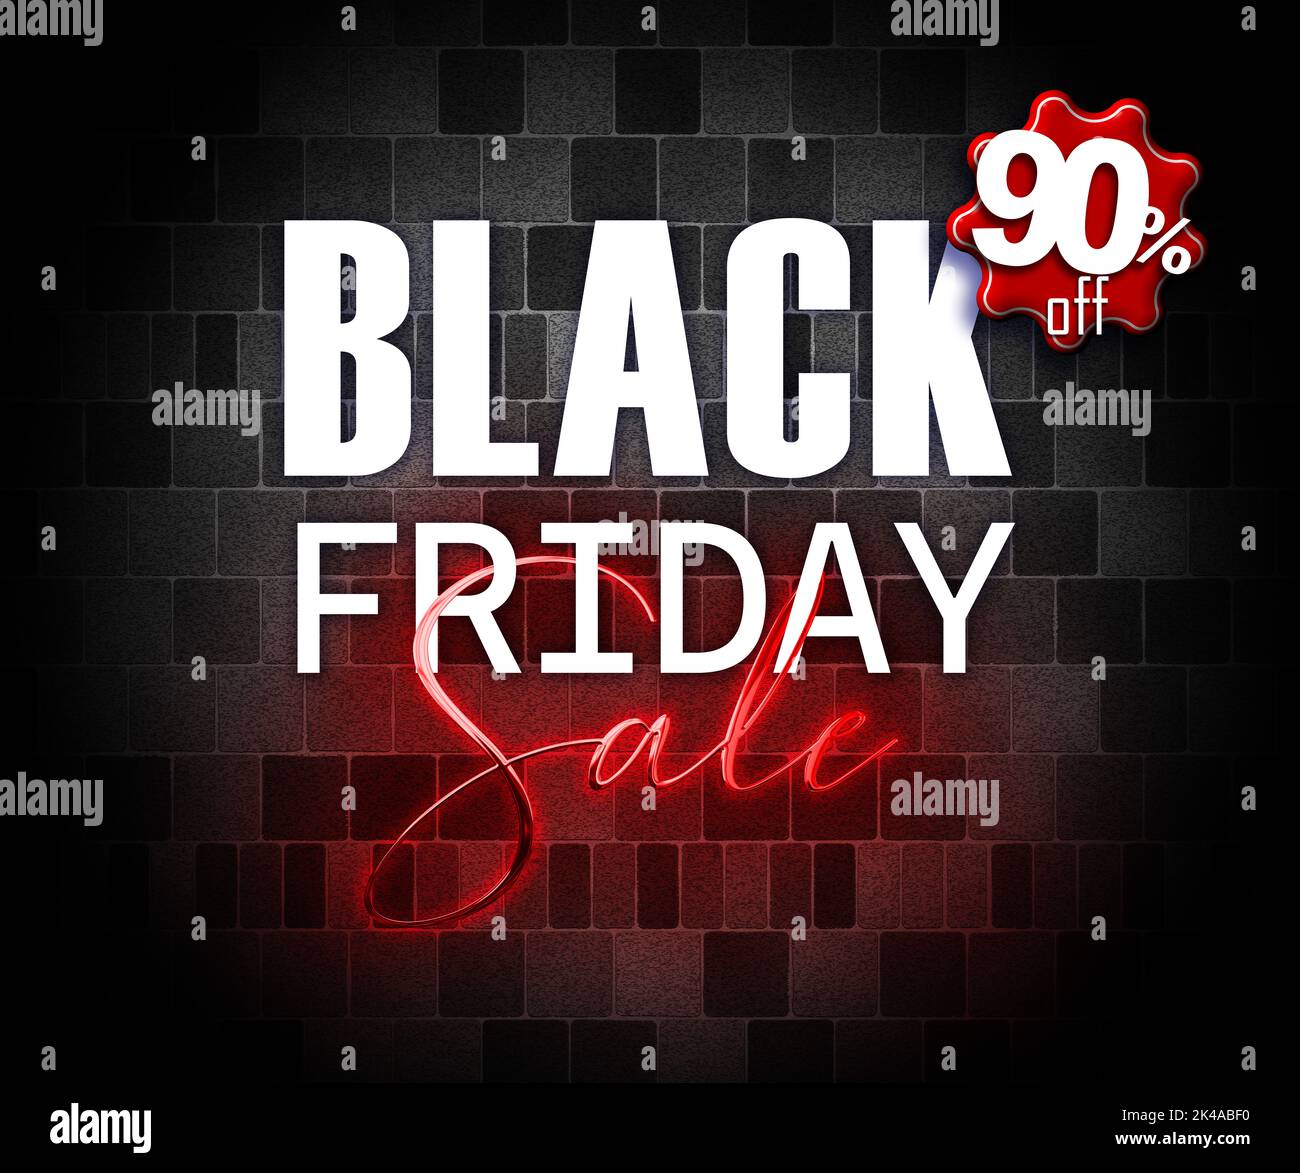 illustration with 3d elements black friday promotion banner 90 percent off sales increase Stock Photo